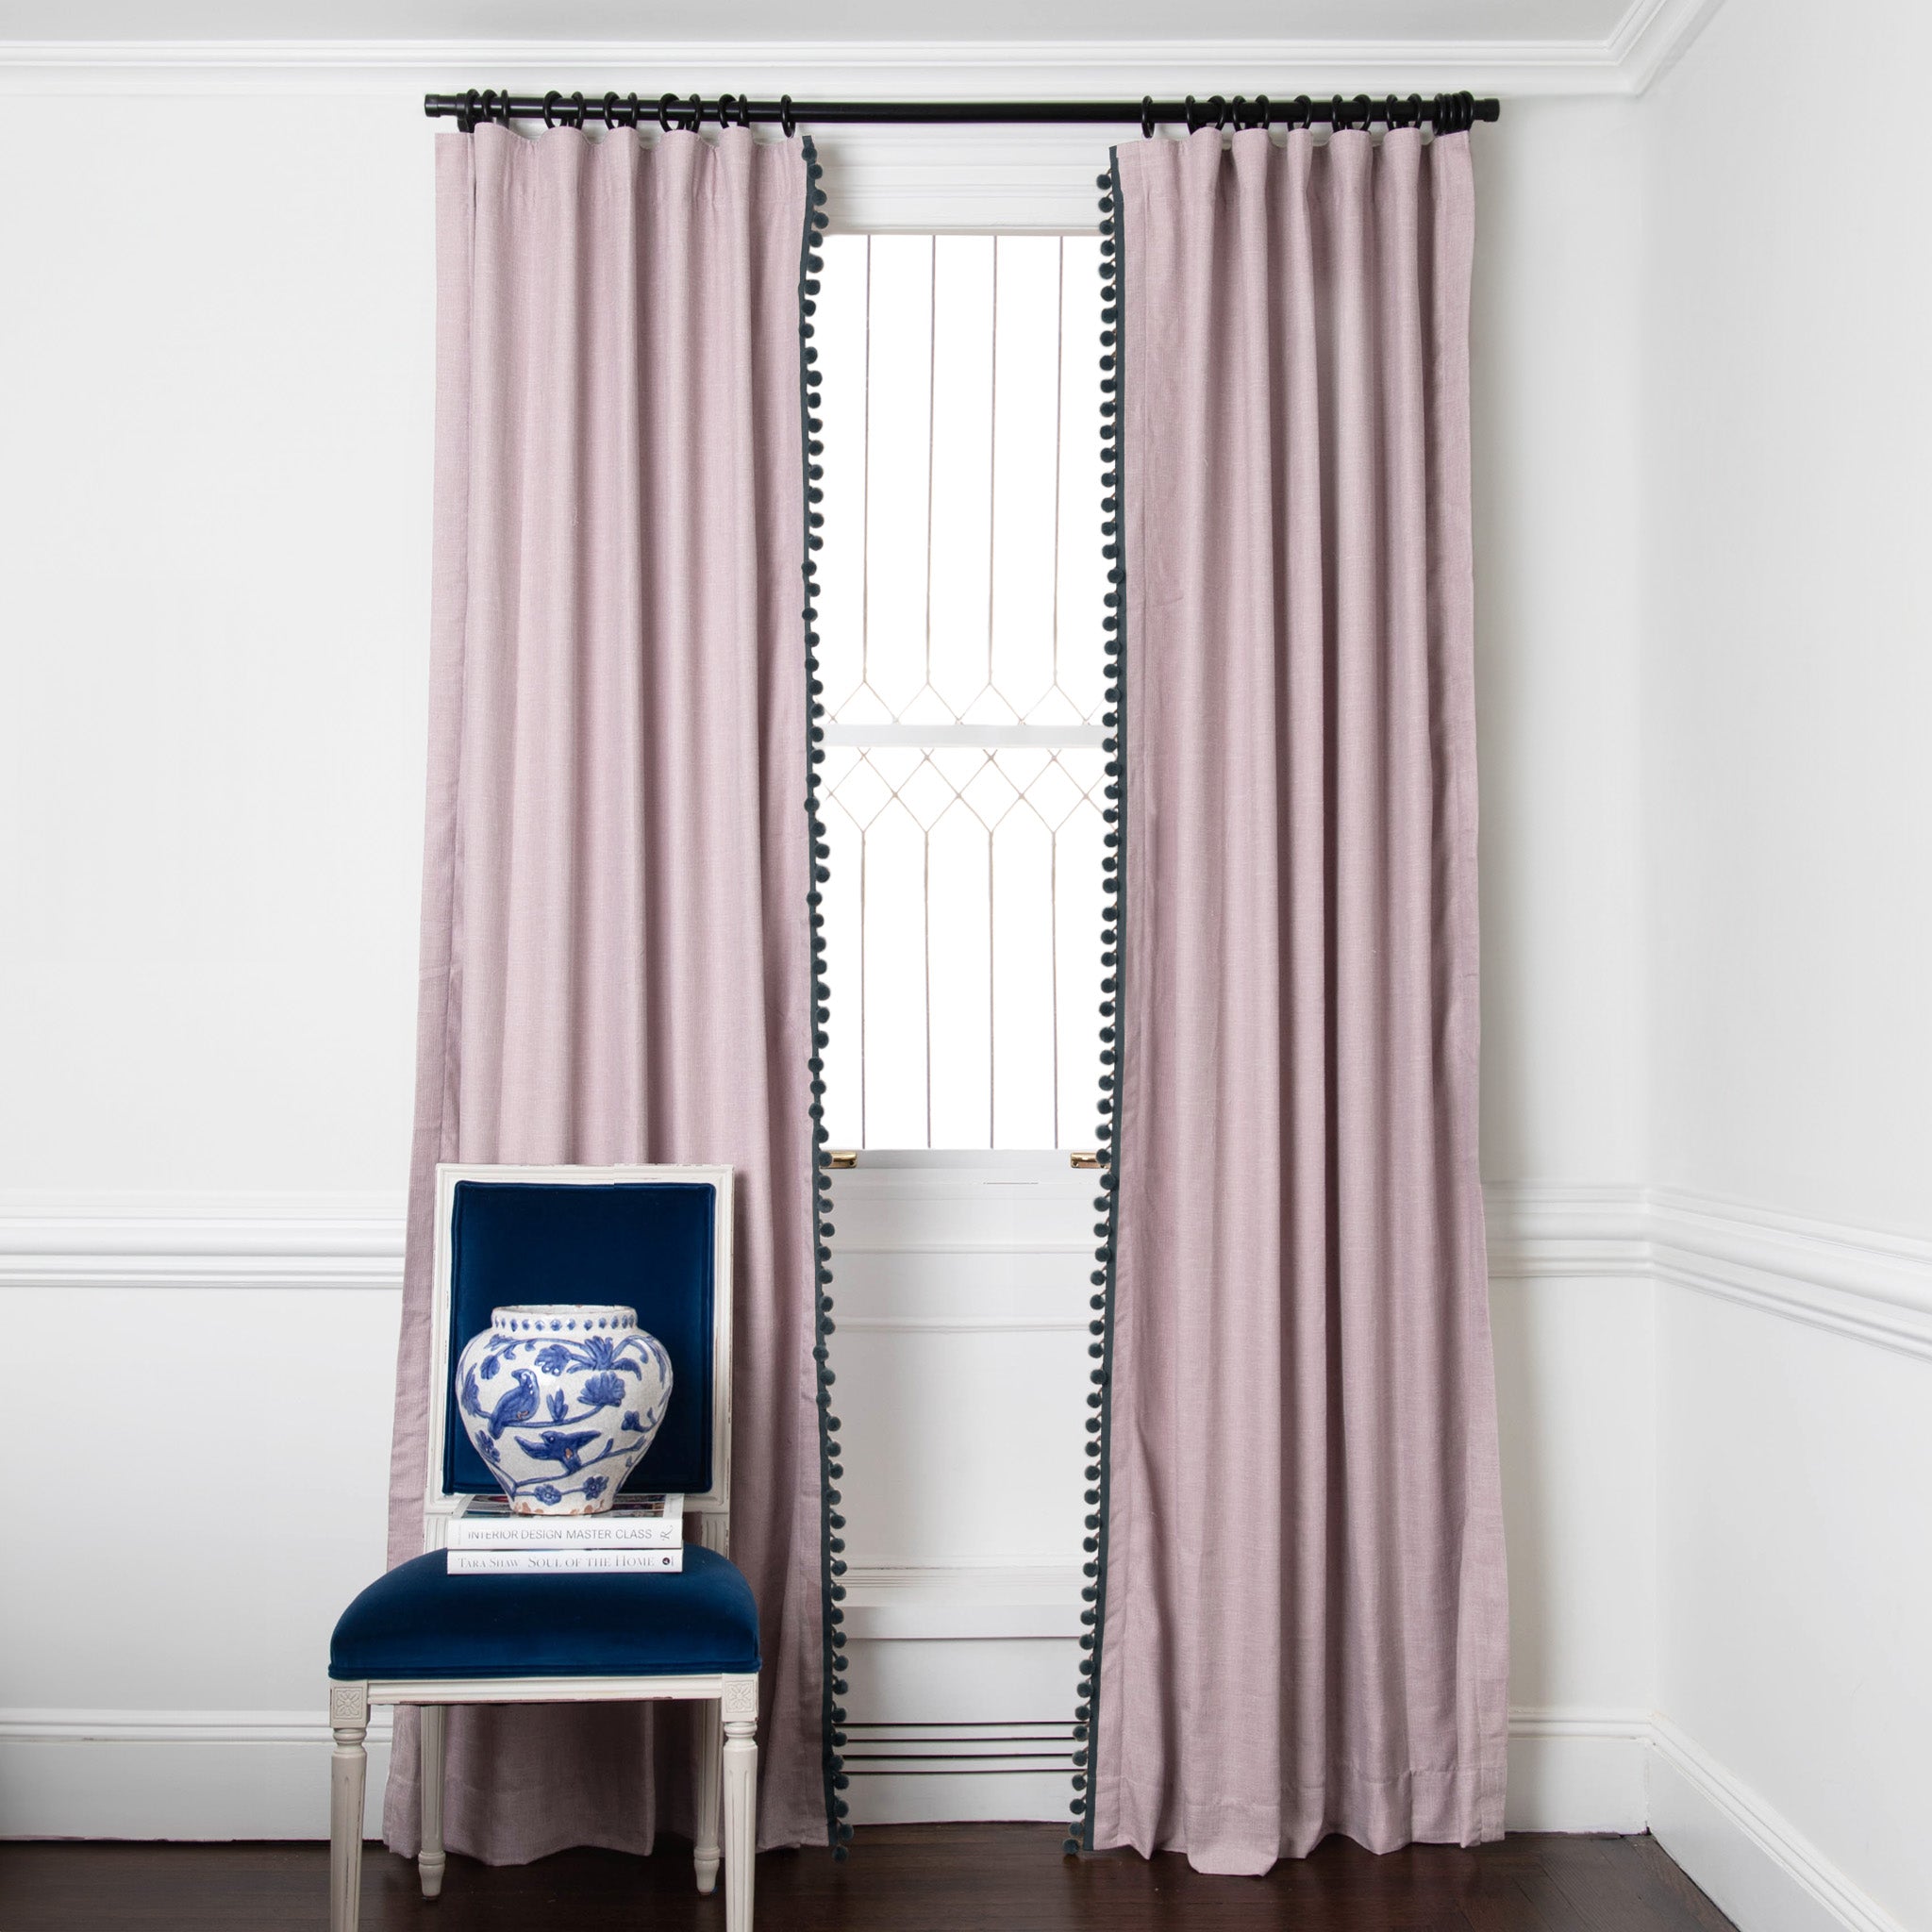 pink curtains on a metal rod in front of an illuminated window with a navy chair in front stacked with books